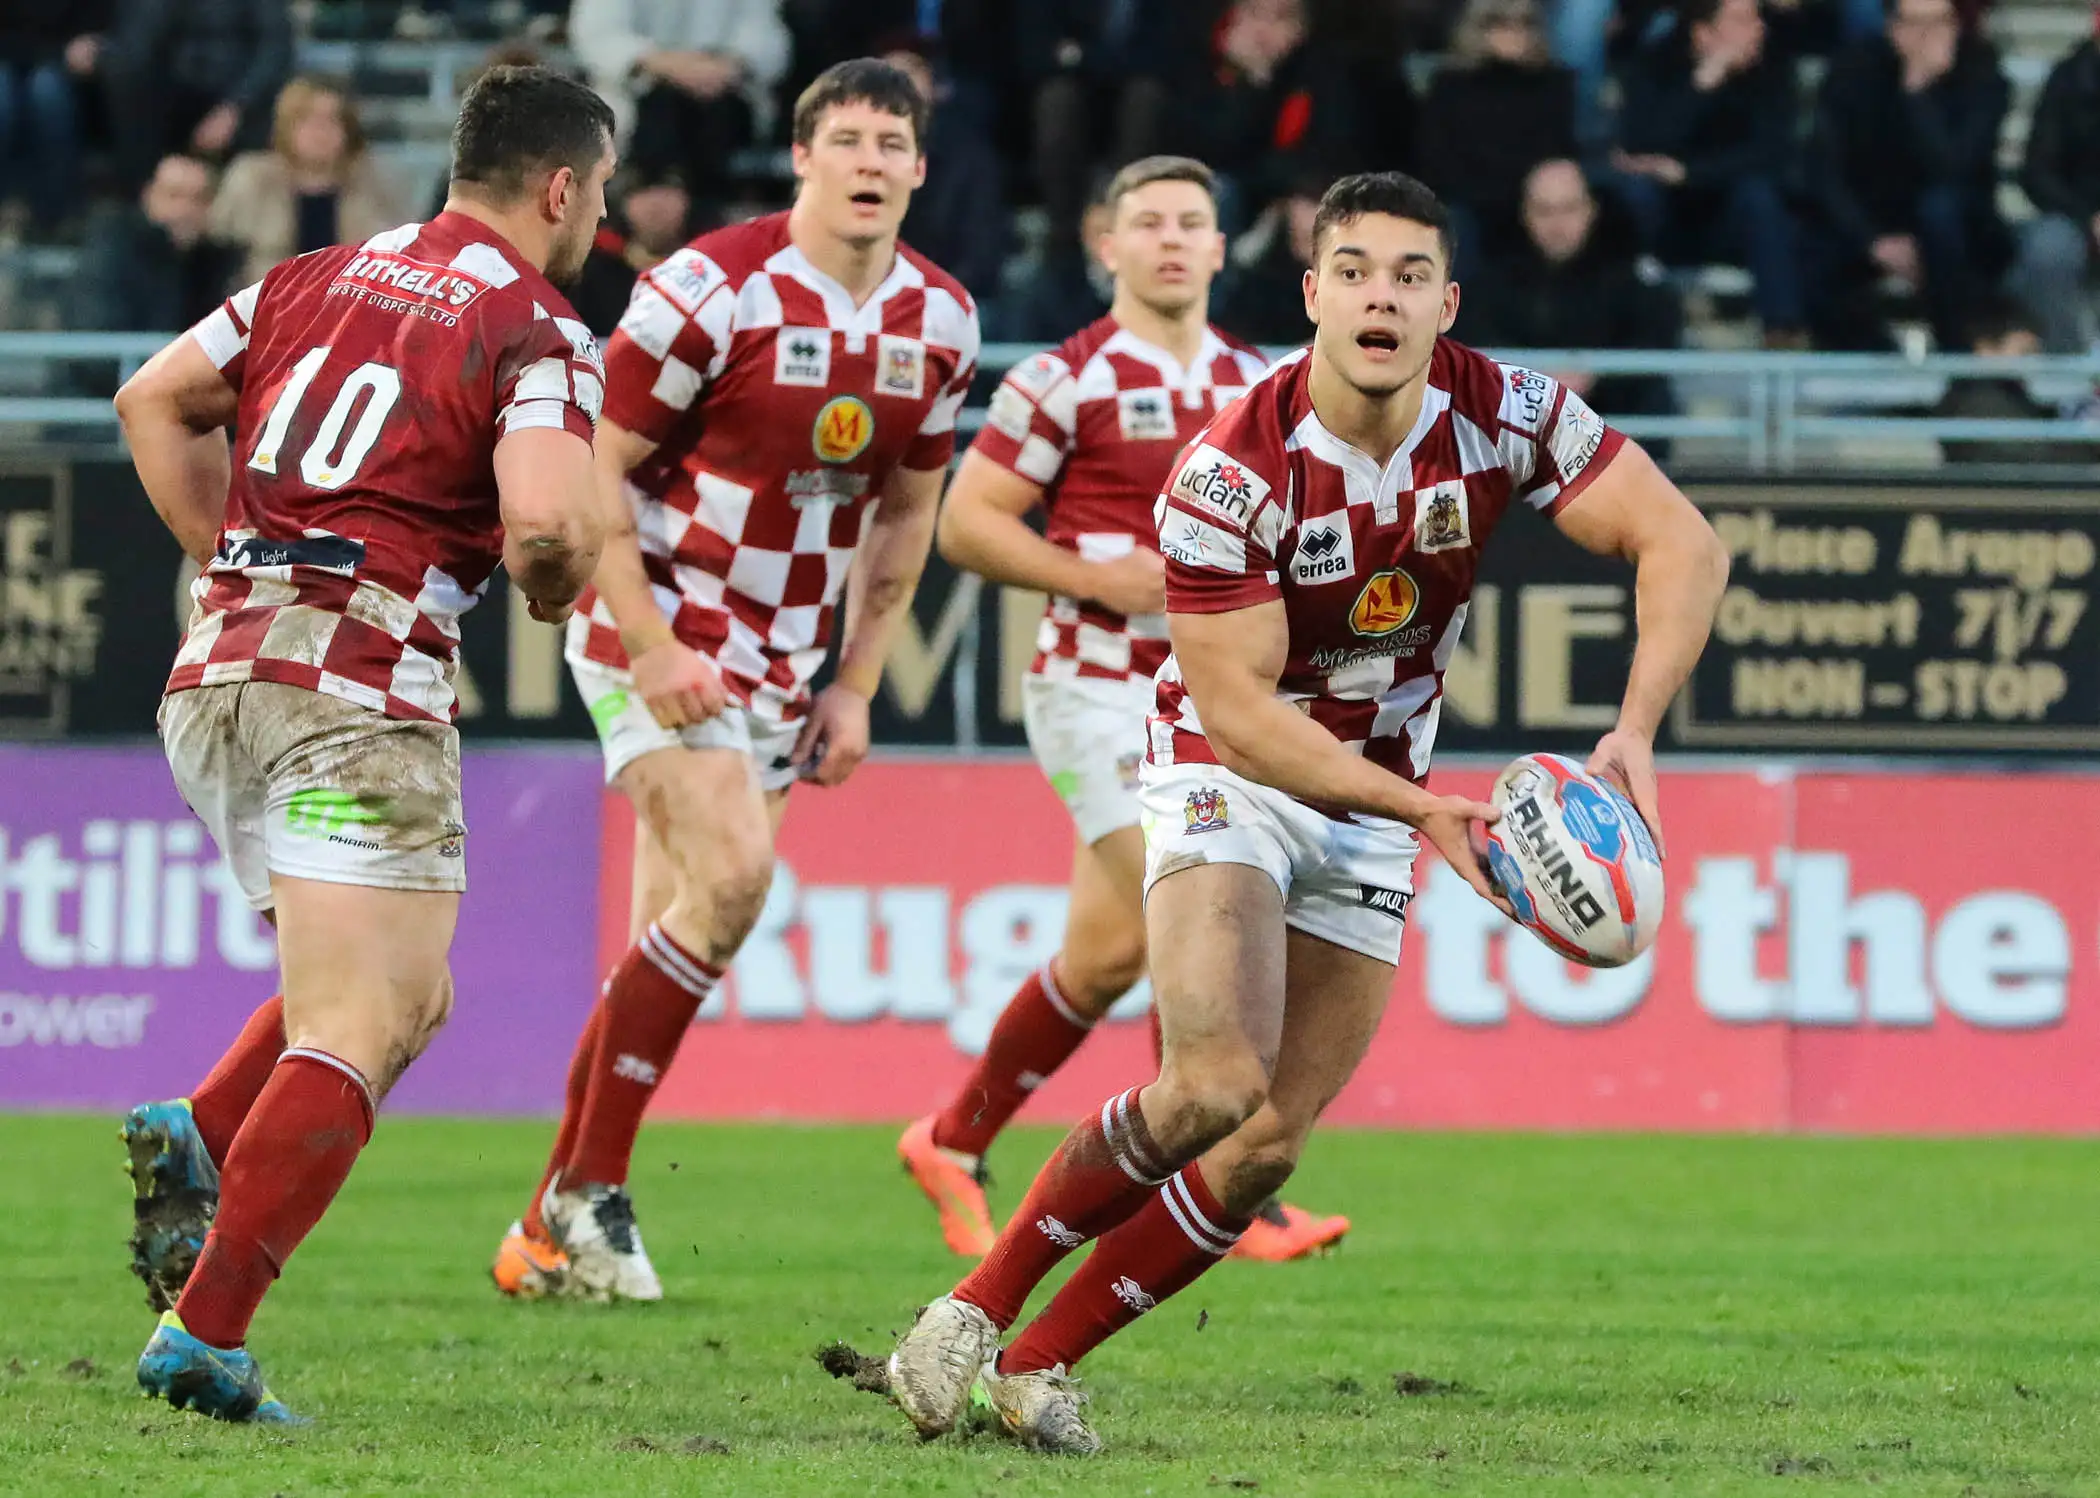 Jake Shorrocks aiming to break into Wigan’s first-team in 2019 after impressing Adrian Lam